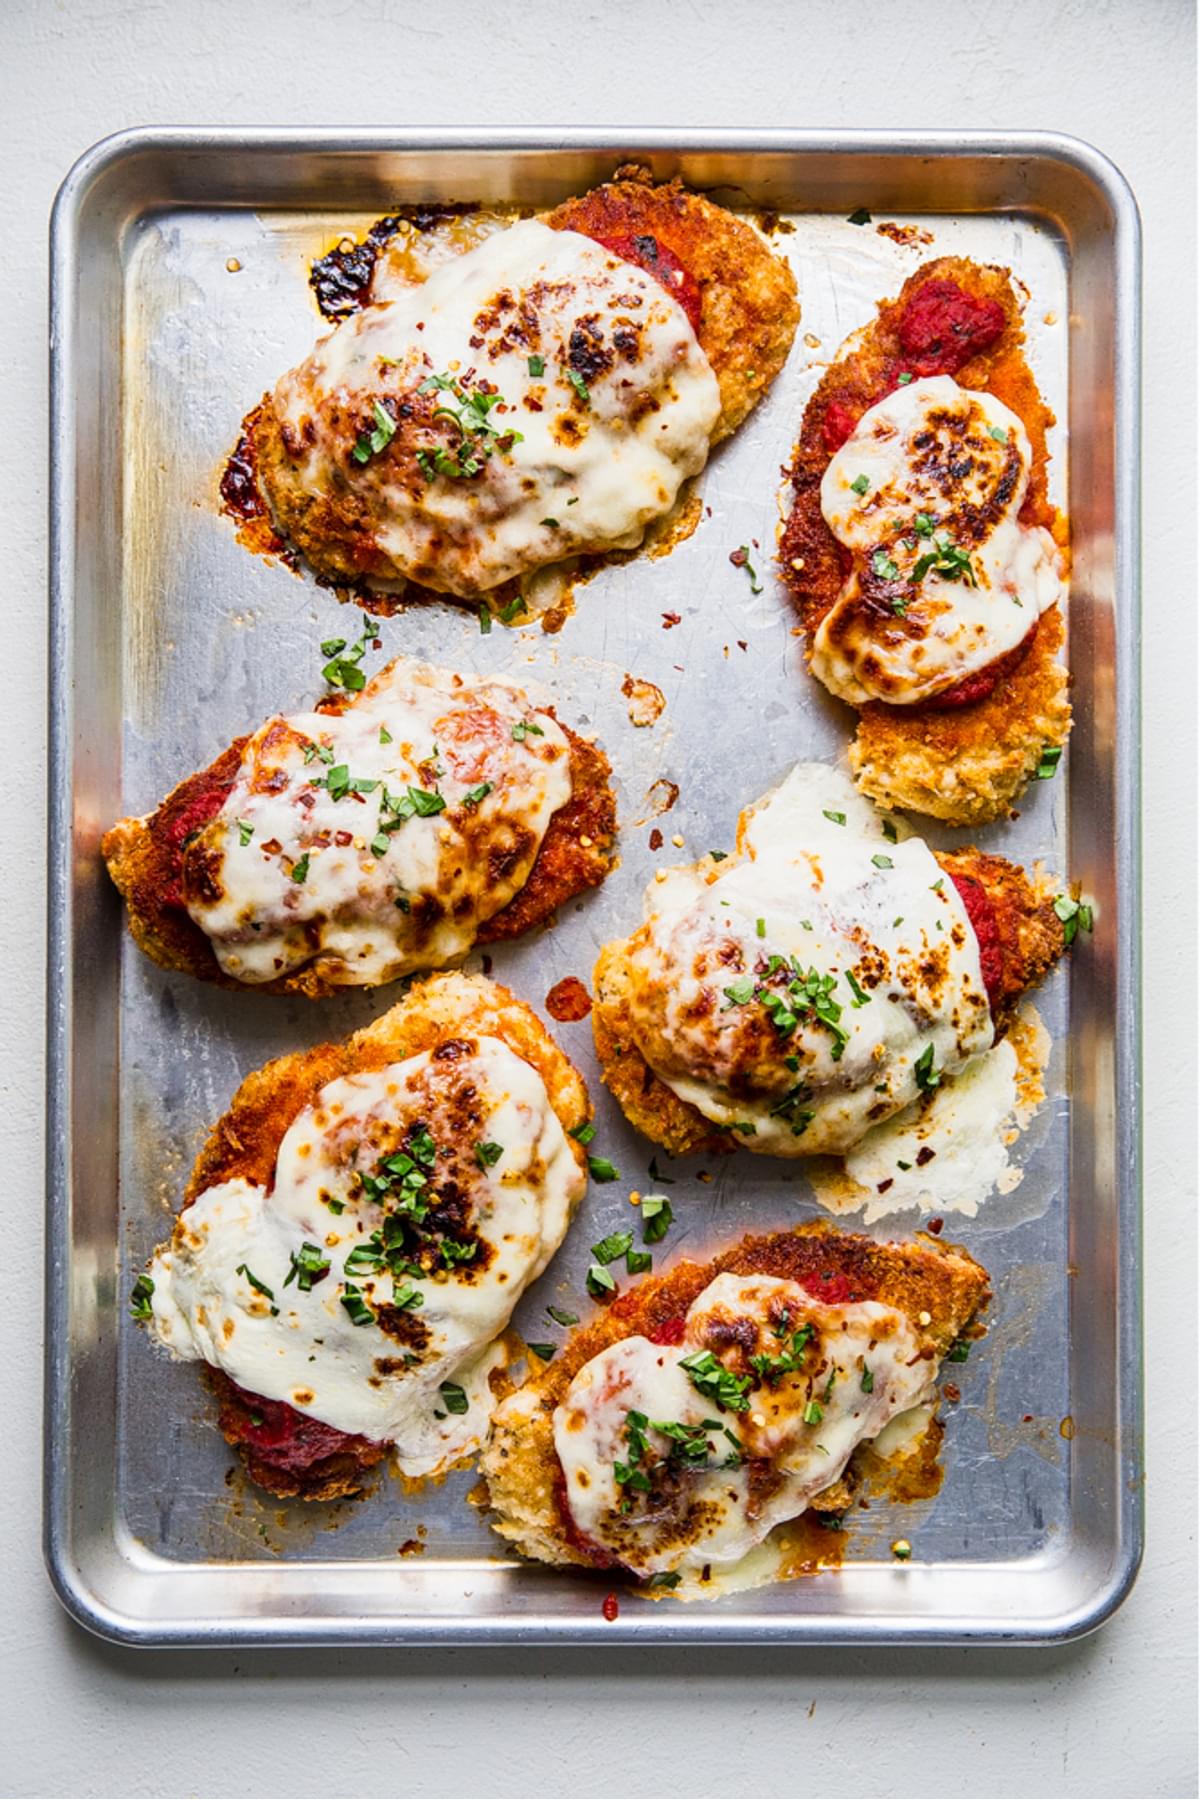 oven baked chicken parmesan with marinara, mozzarella, basil and red pepper flakes